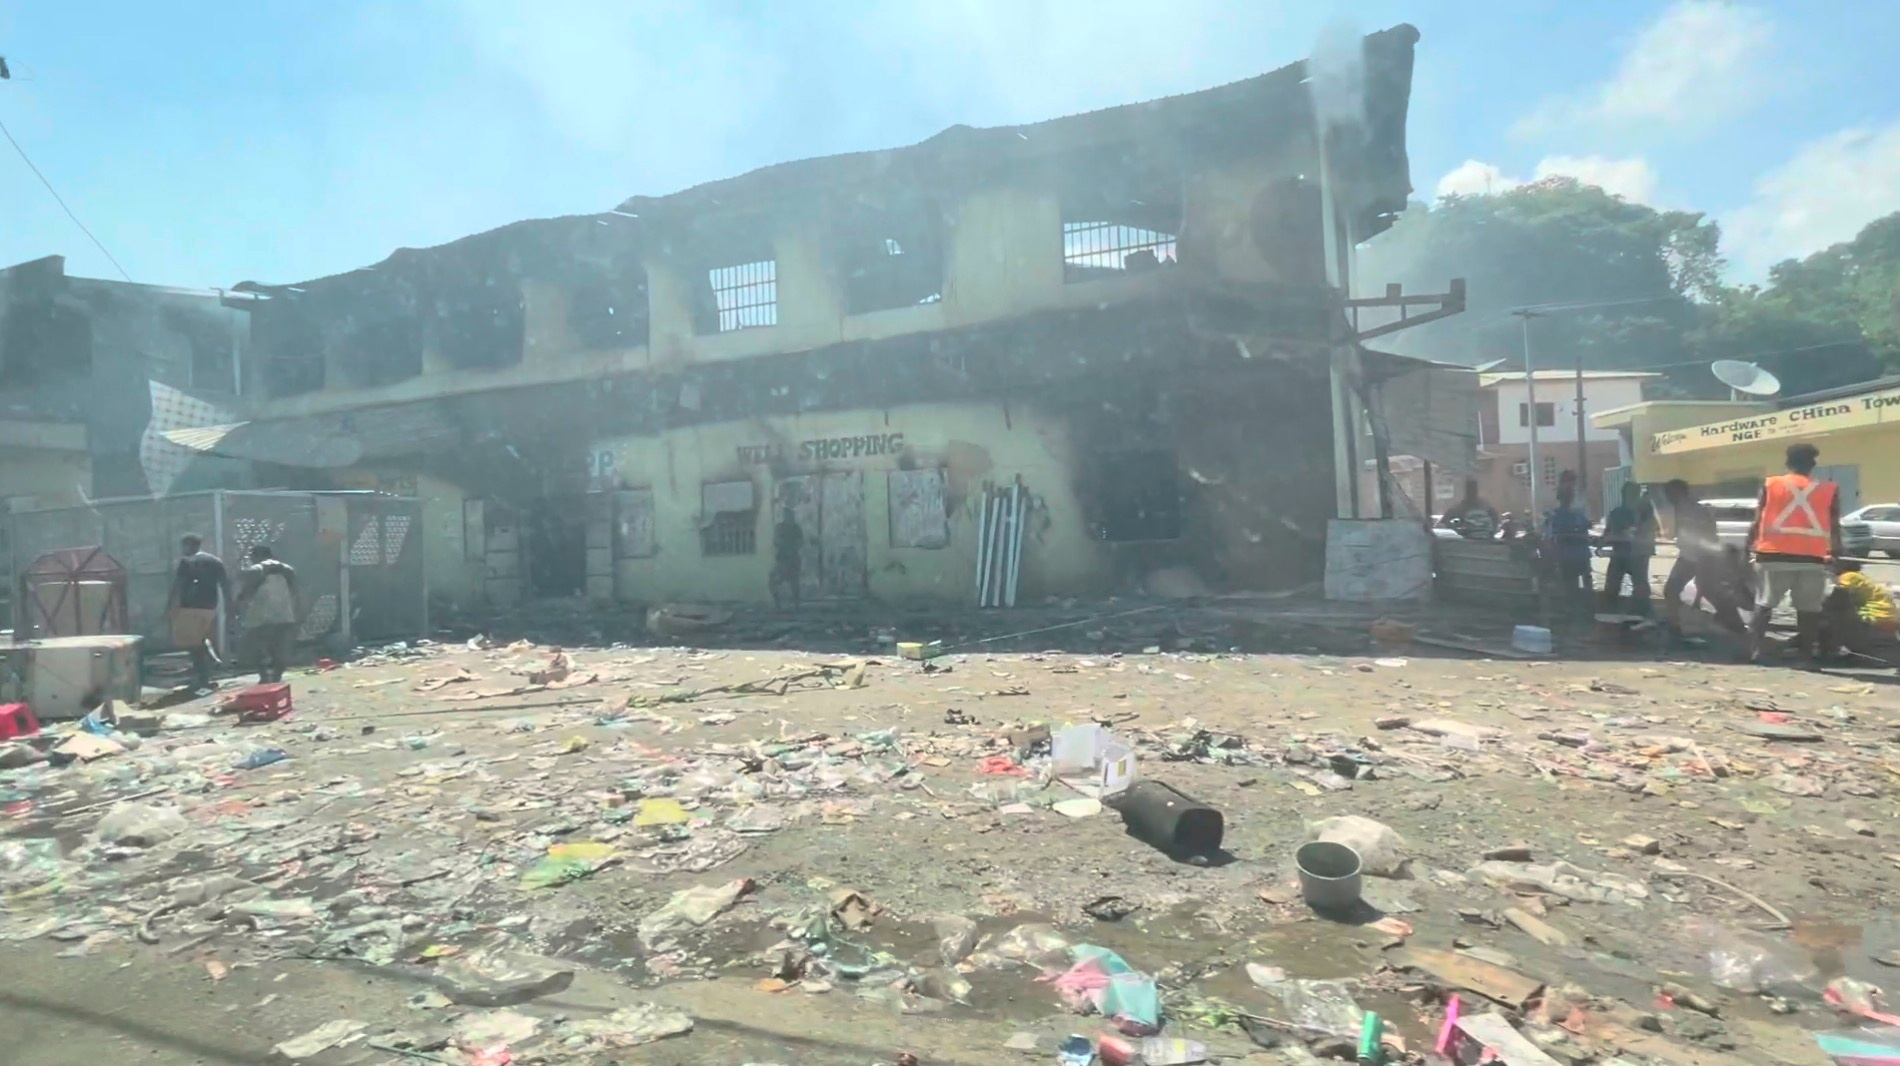 Destroyed building is depicted after days of unrest in Honiara, Solomon Islands on November 27, 2021 in this still image taken from a video.  Jone Tuiipelehaki / via REUTERS